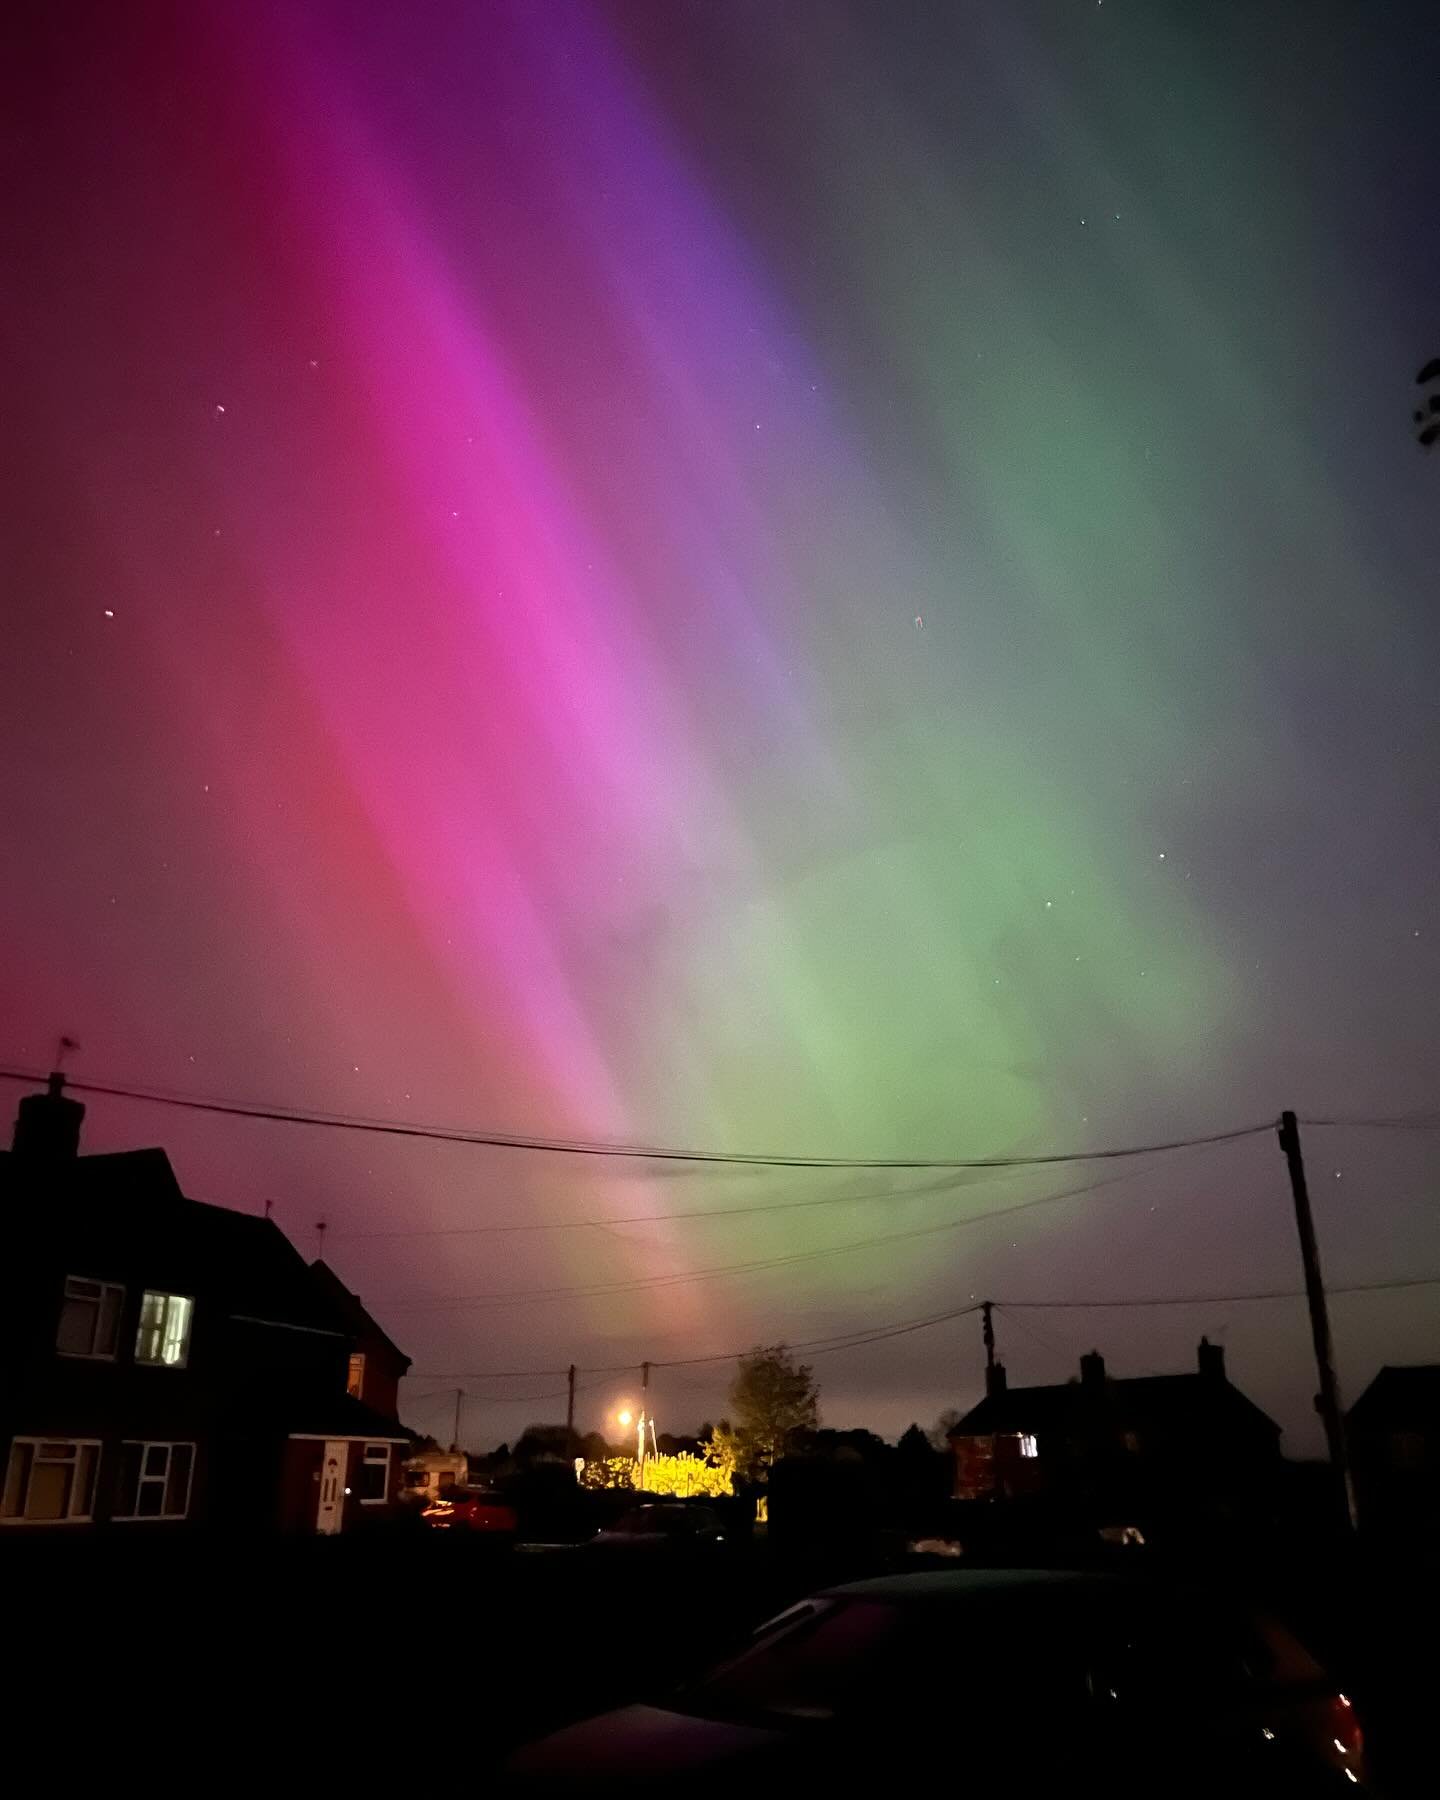 Current view in Buckinghamshire. Can&rsquo;t believe it. I&rsquo;ve been to Iceland and Norway and never seen the Northern Lights. This is awesome